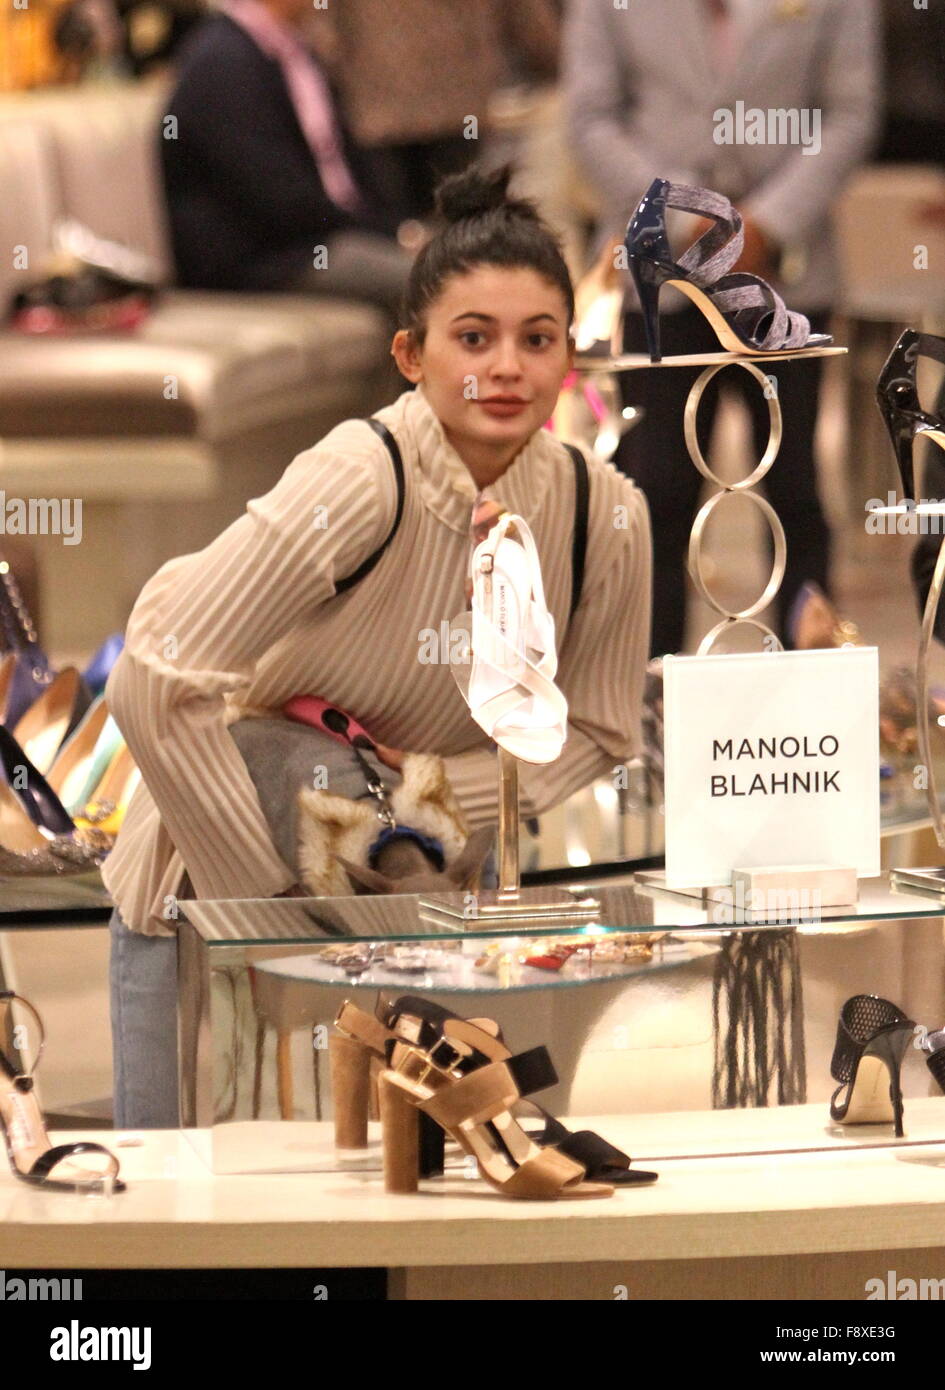 Los Angeles, California, USA. 11th December, 2015. Who: Kylie Jenner, Los Angeles, CA, USA What: Seen doing Christmas shopping with her puppy at Fred Segal and Barney's New York stores. Where: Los Angeles, CA, USA When: December 11, 2015 Copyright Credit:  The Media Circuit/Alamy Live News Stock Photo